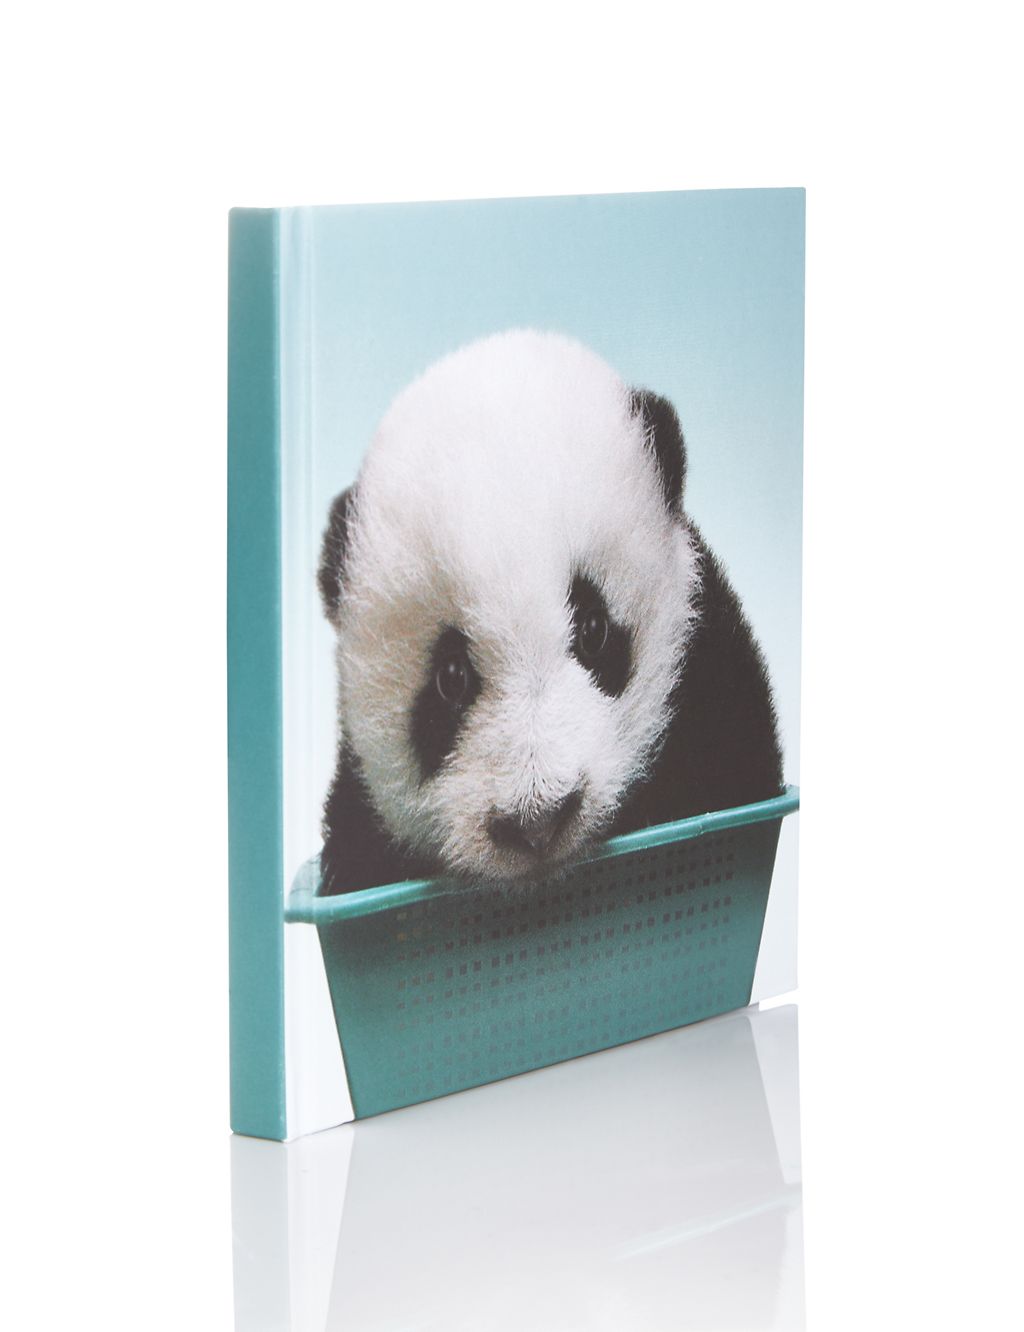 Baby Panda Address & Special Events Book 1 of 3